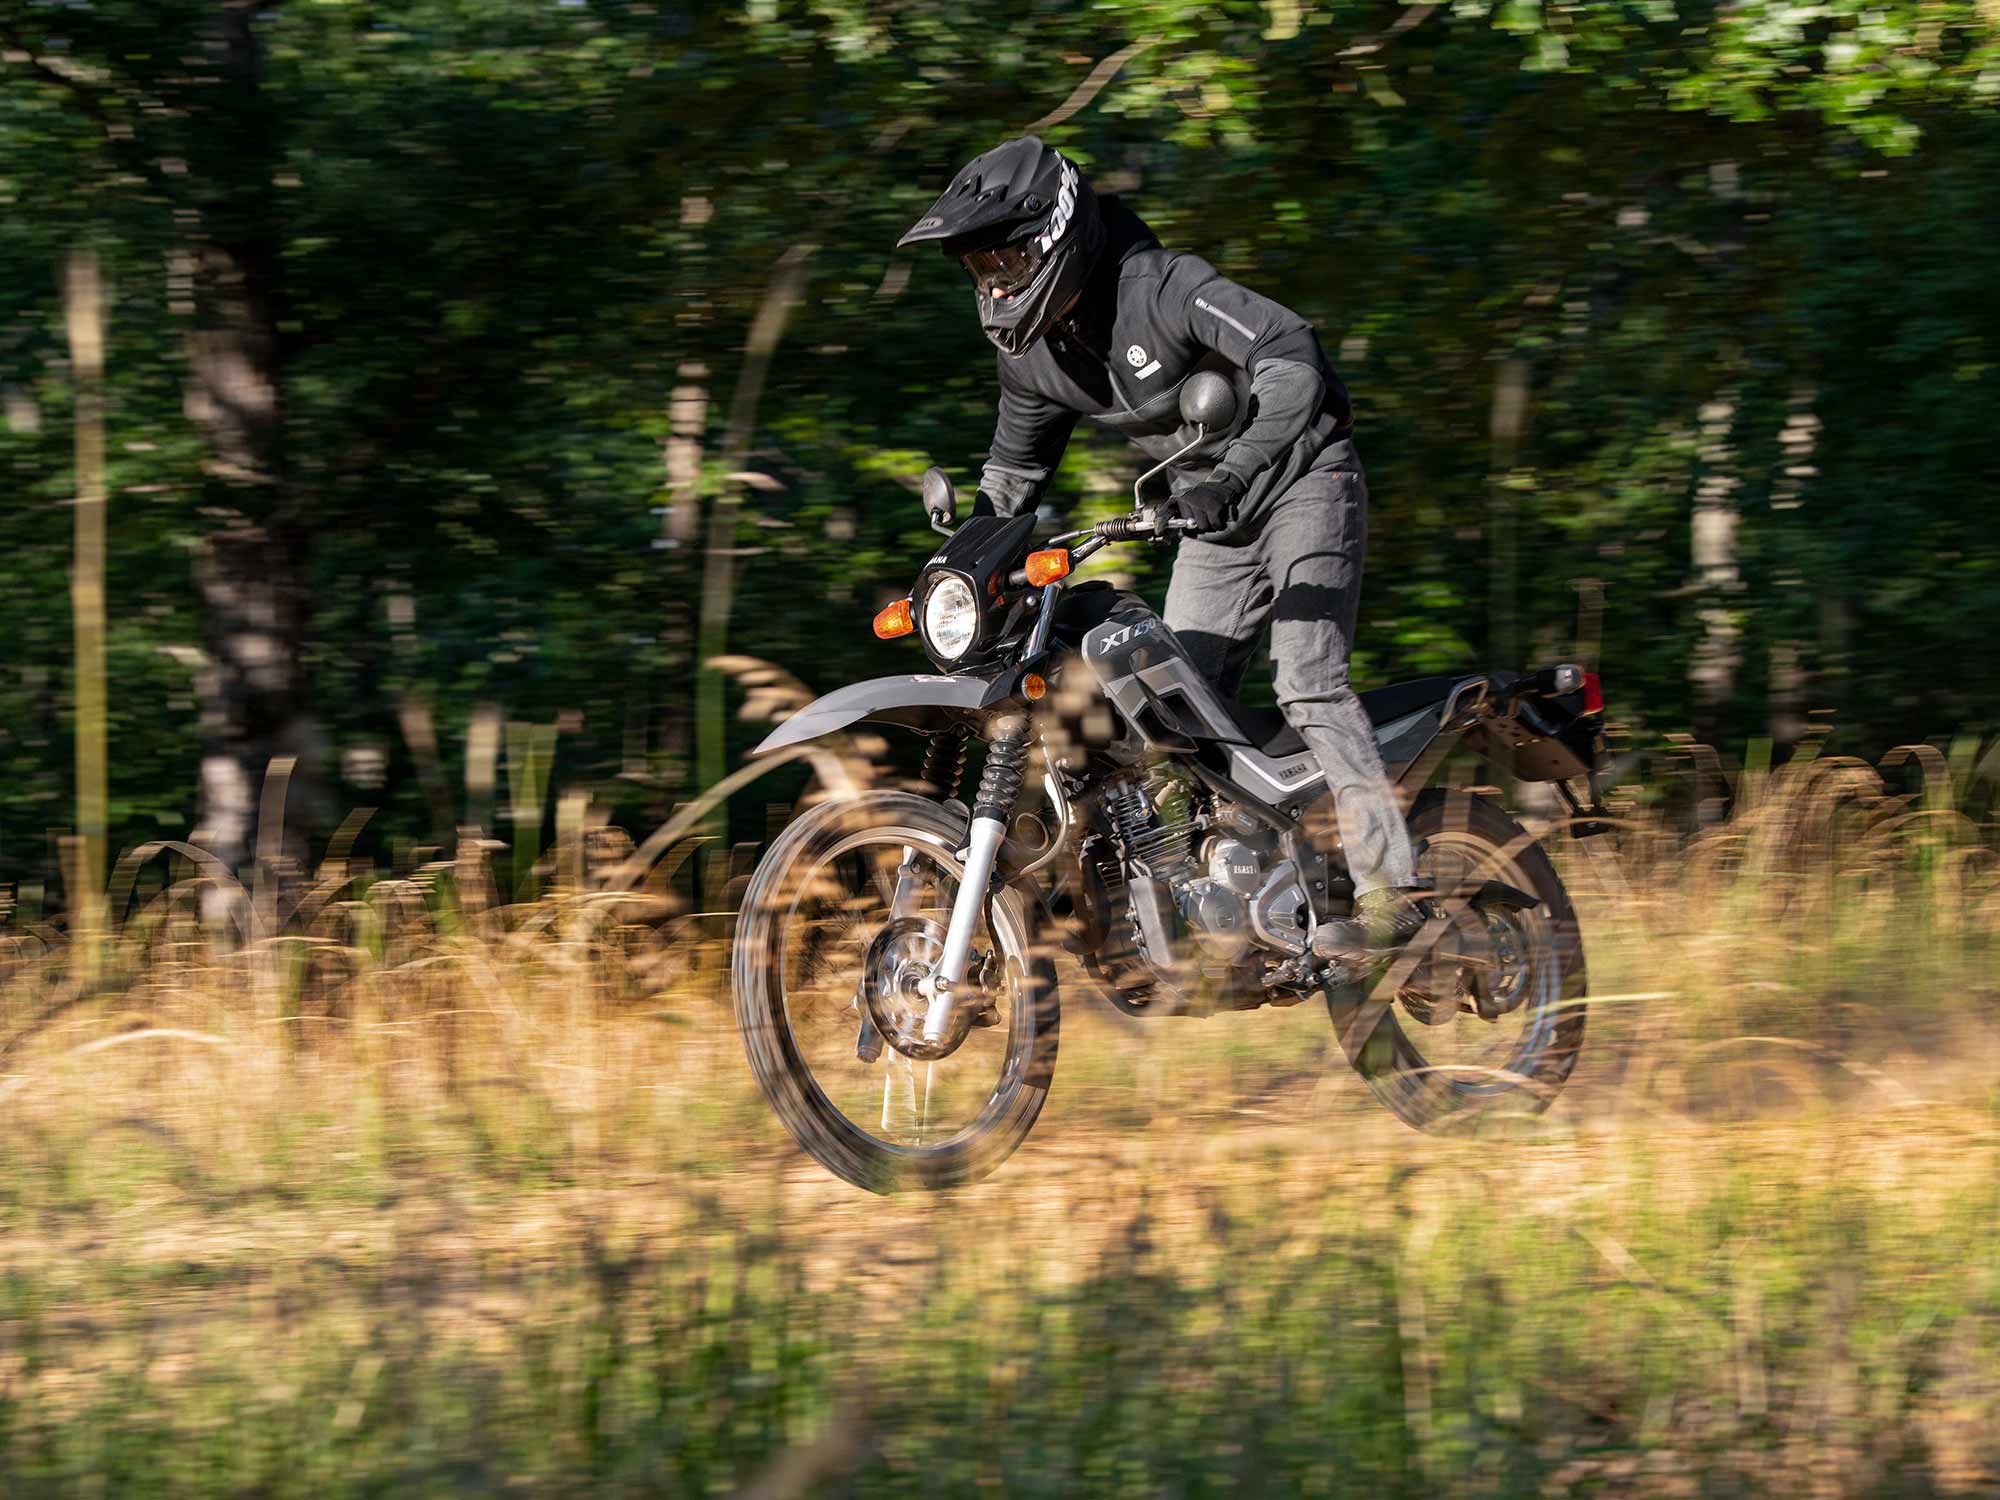 The XT250 is a great beginner dual sport and a fun weekend trailbike.